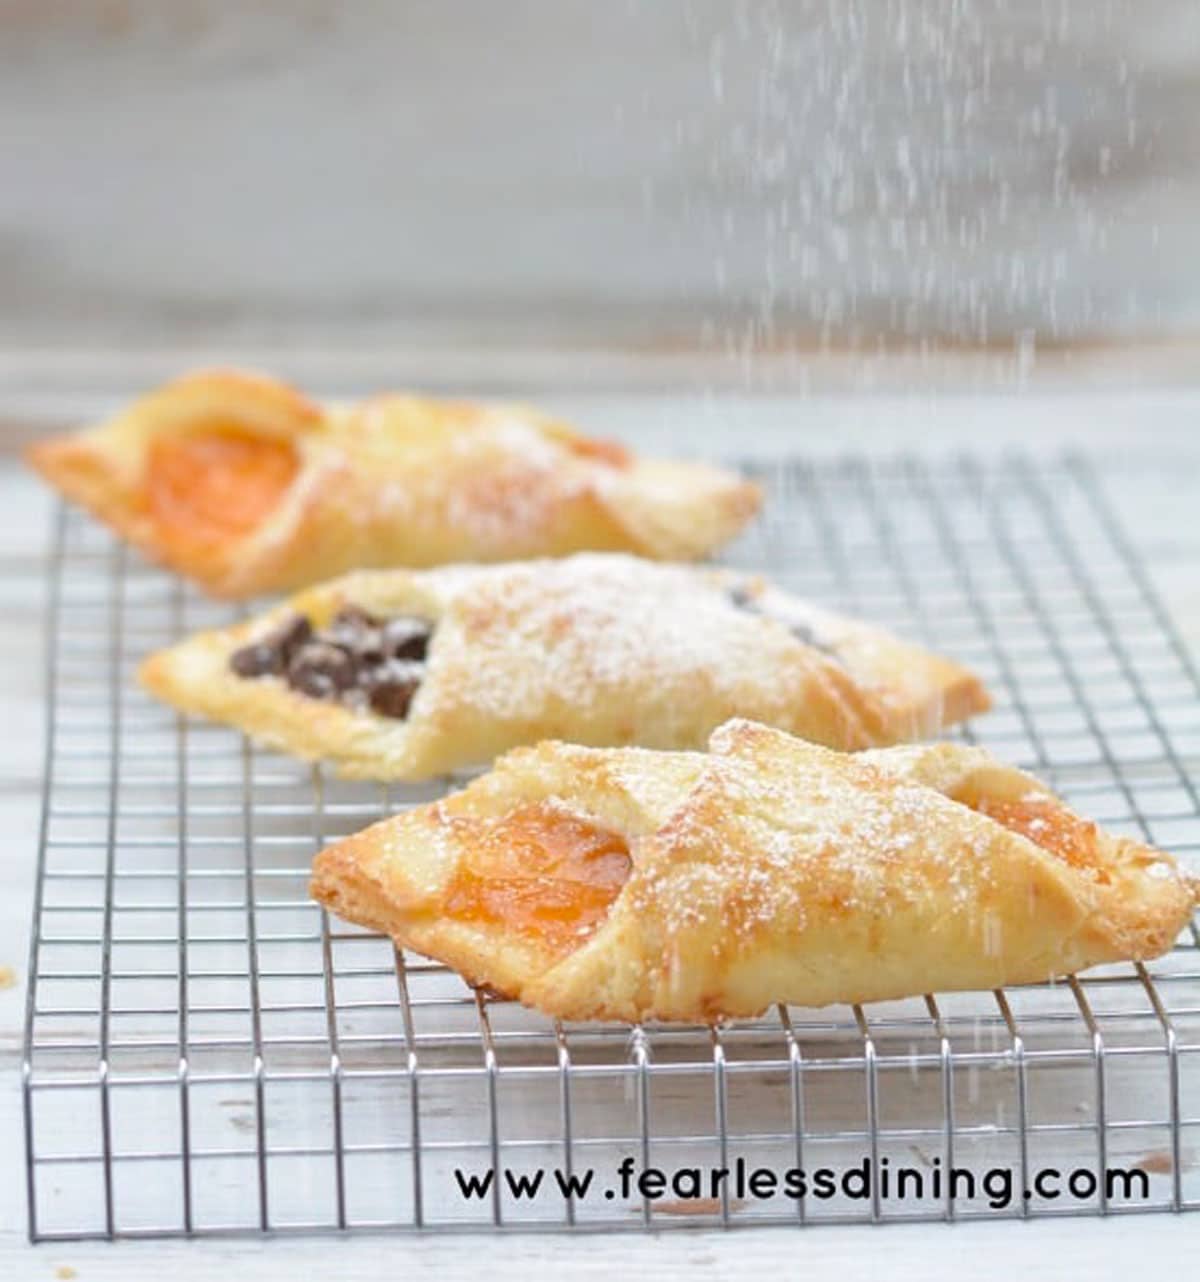 dusting the pastries with powdered sugar